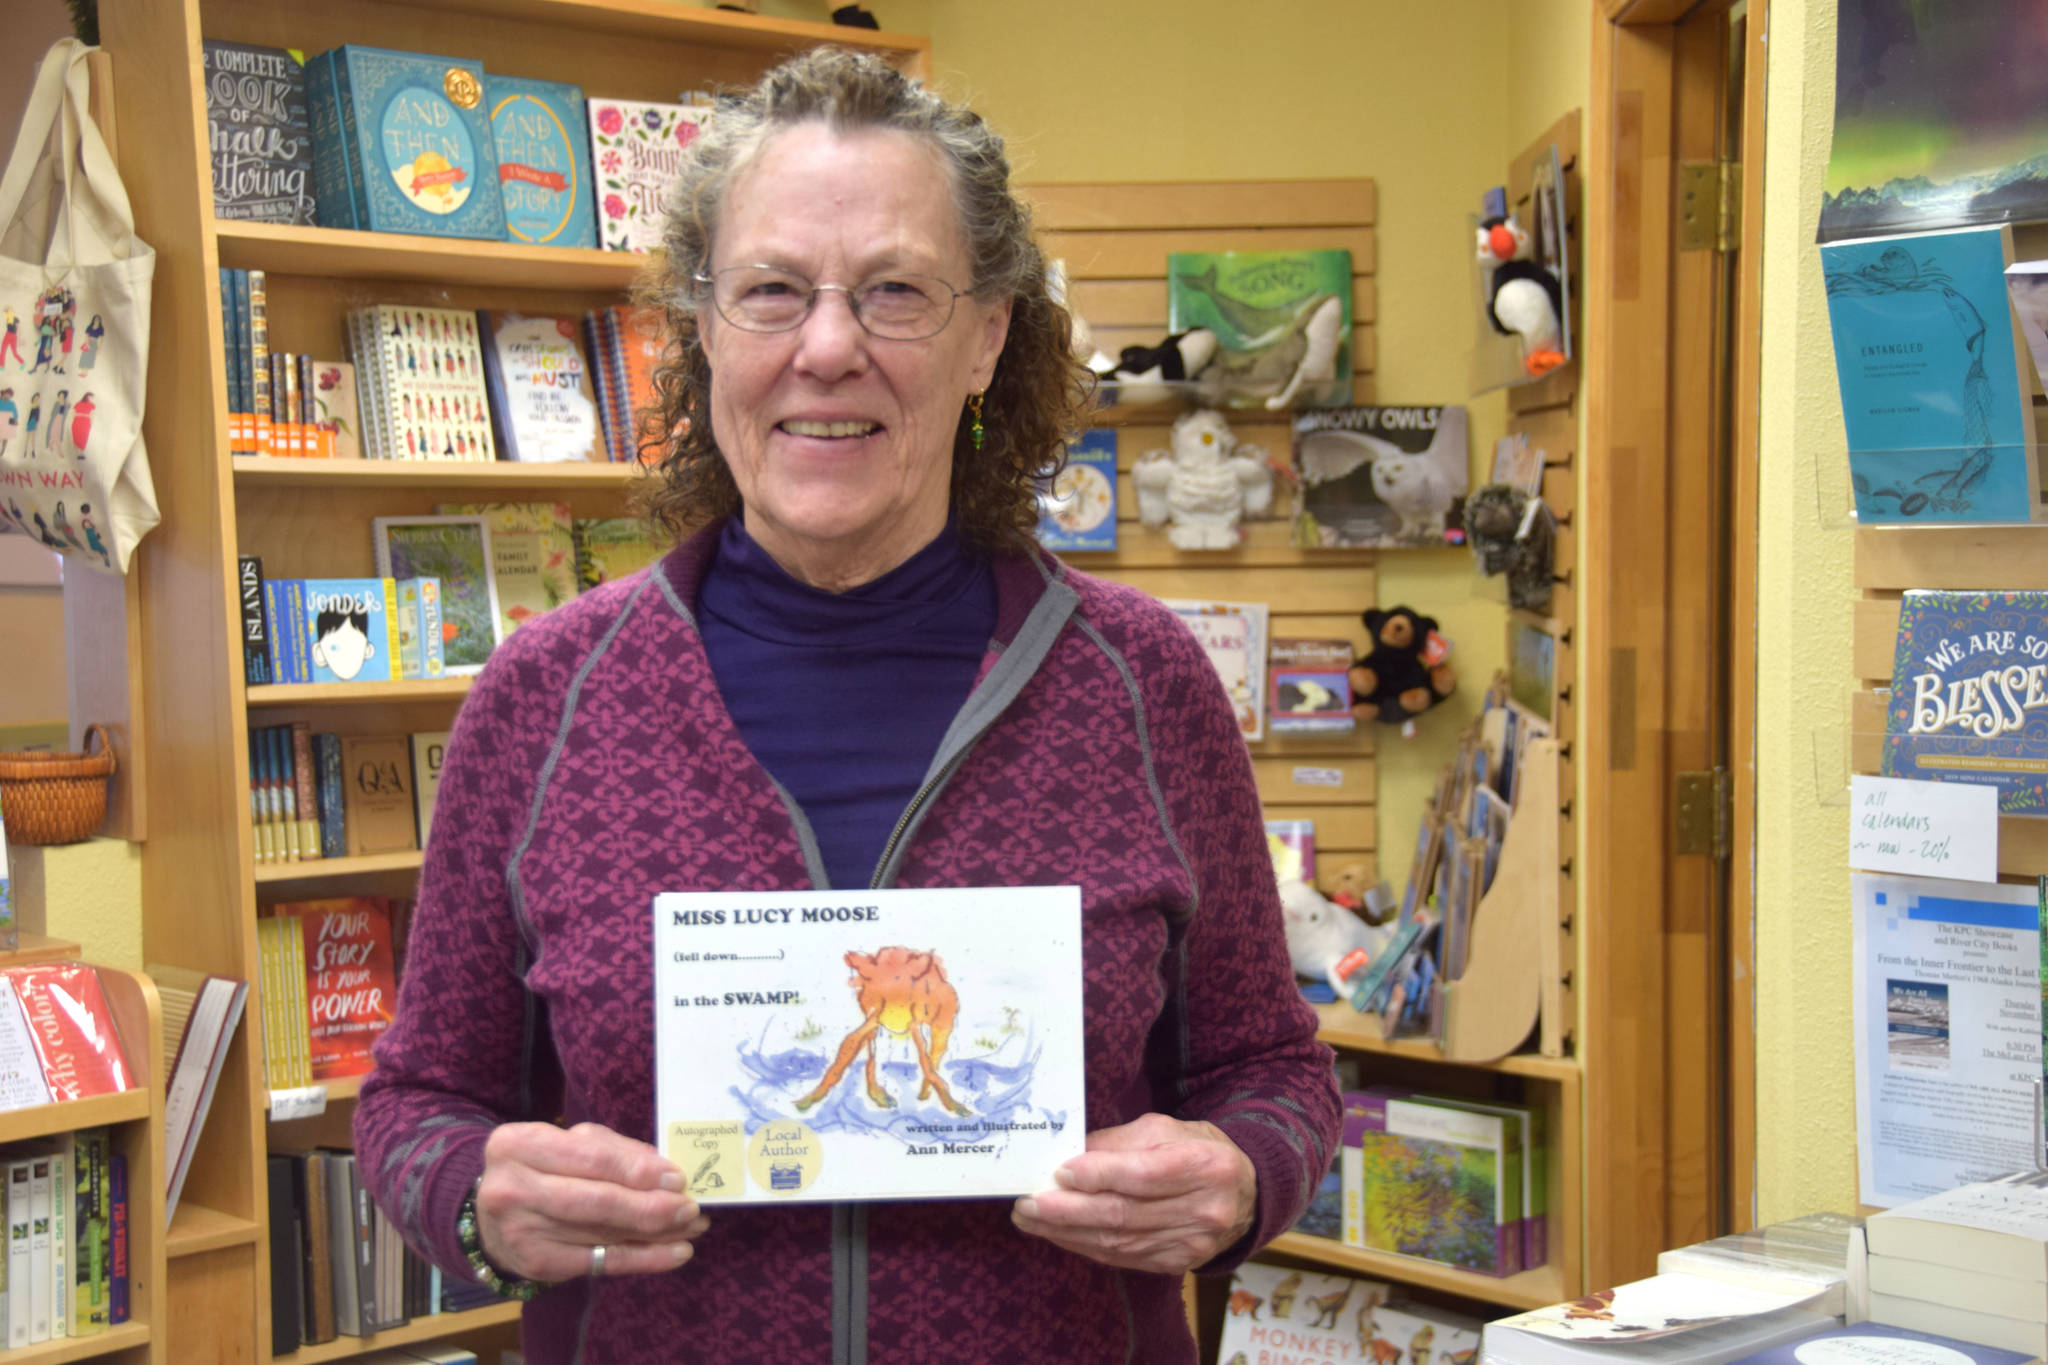 Local author Ann Mercer poses with her book, “Miss Lucy Moose Falls Down in the Swamp” at River City Books in Soldotna on Wednesday. (Photo by Brian Mazurek/Peninsula Clarion)